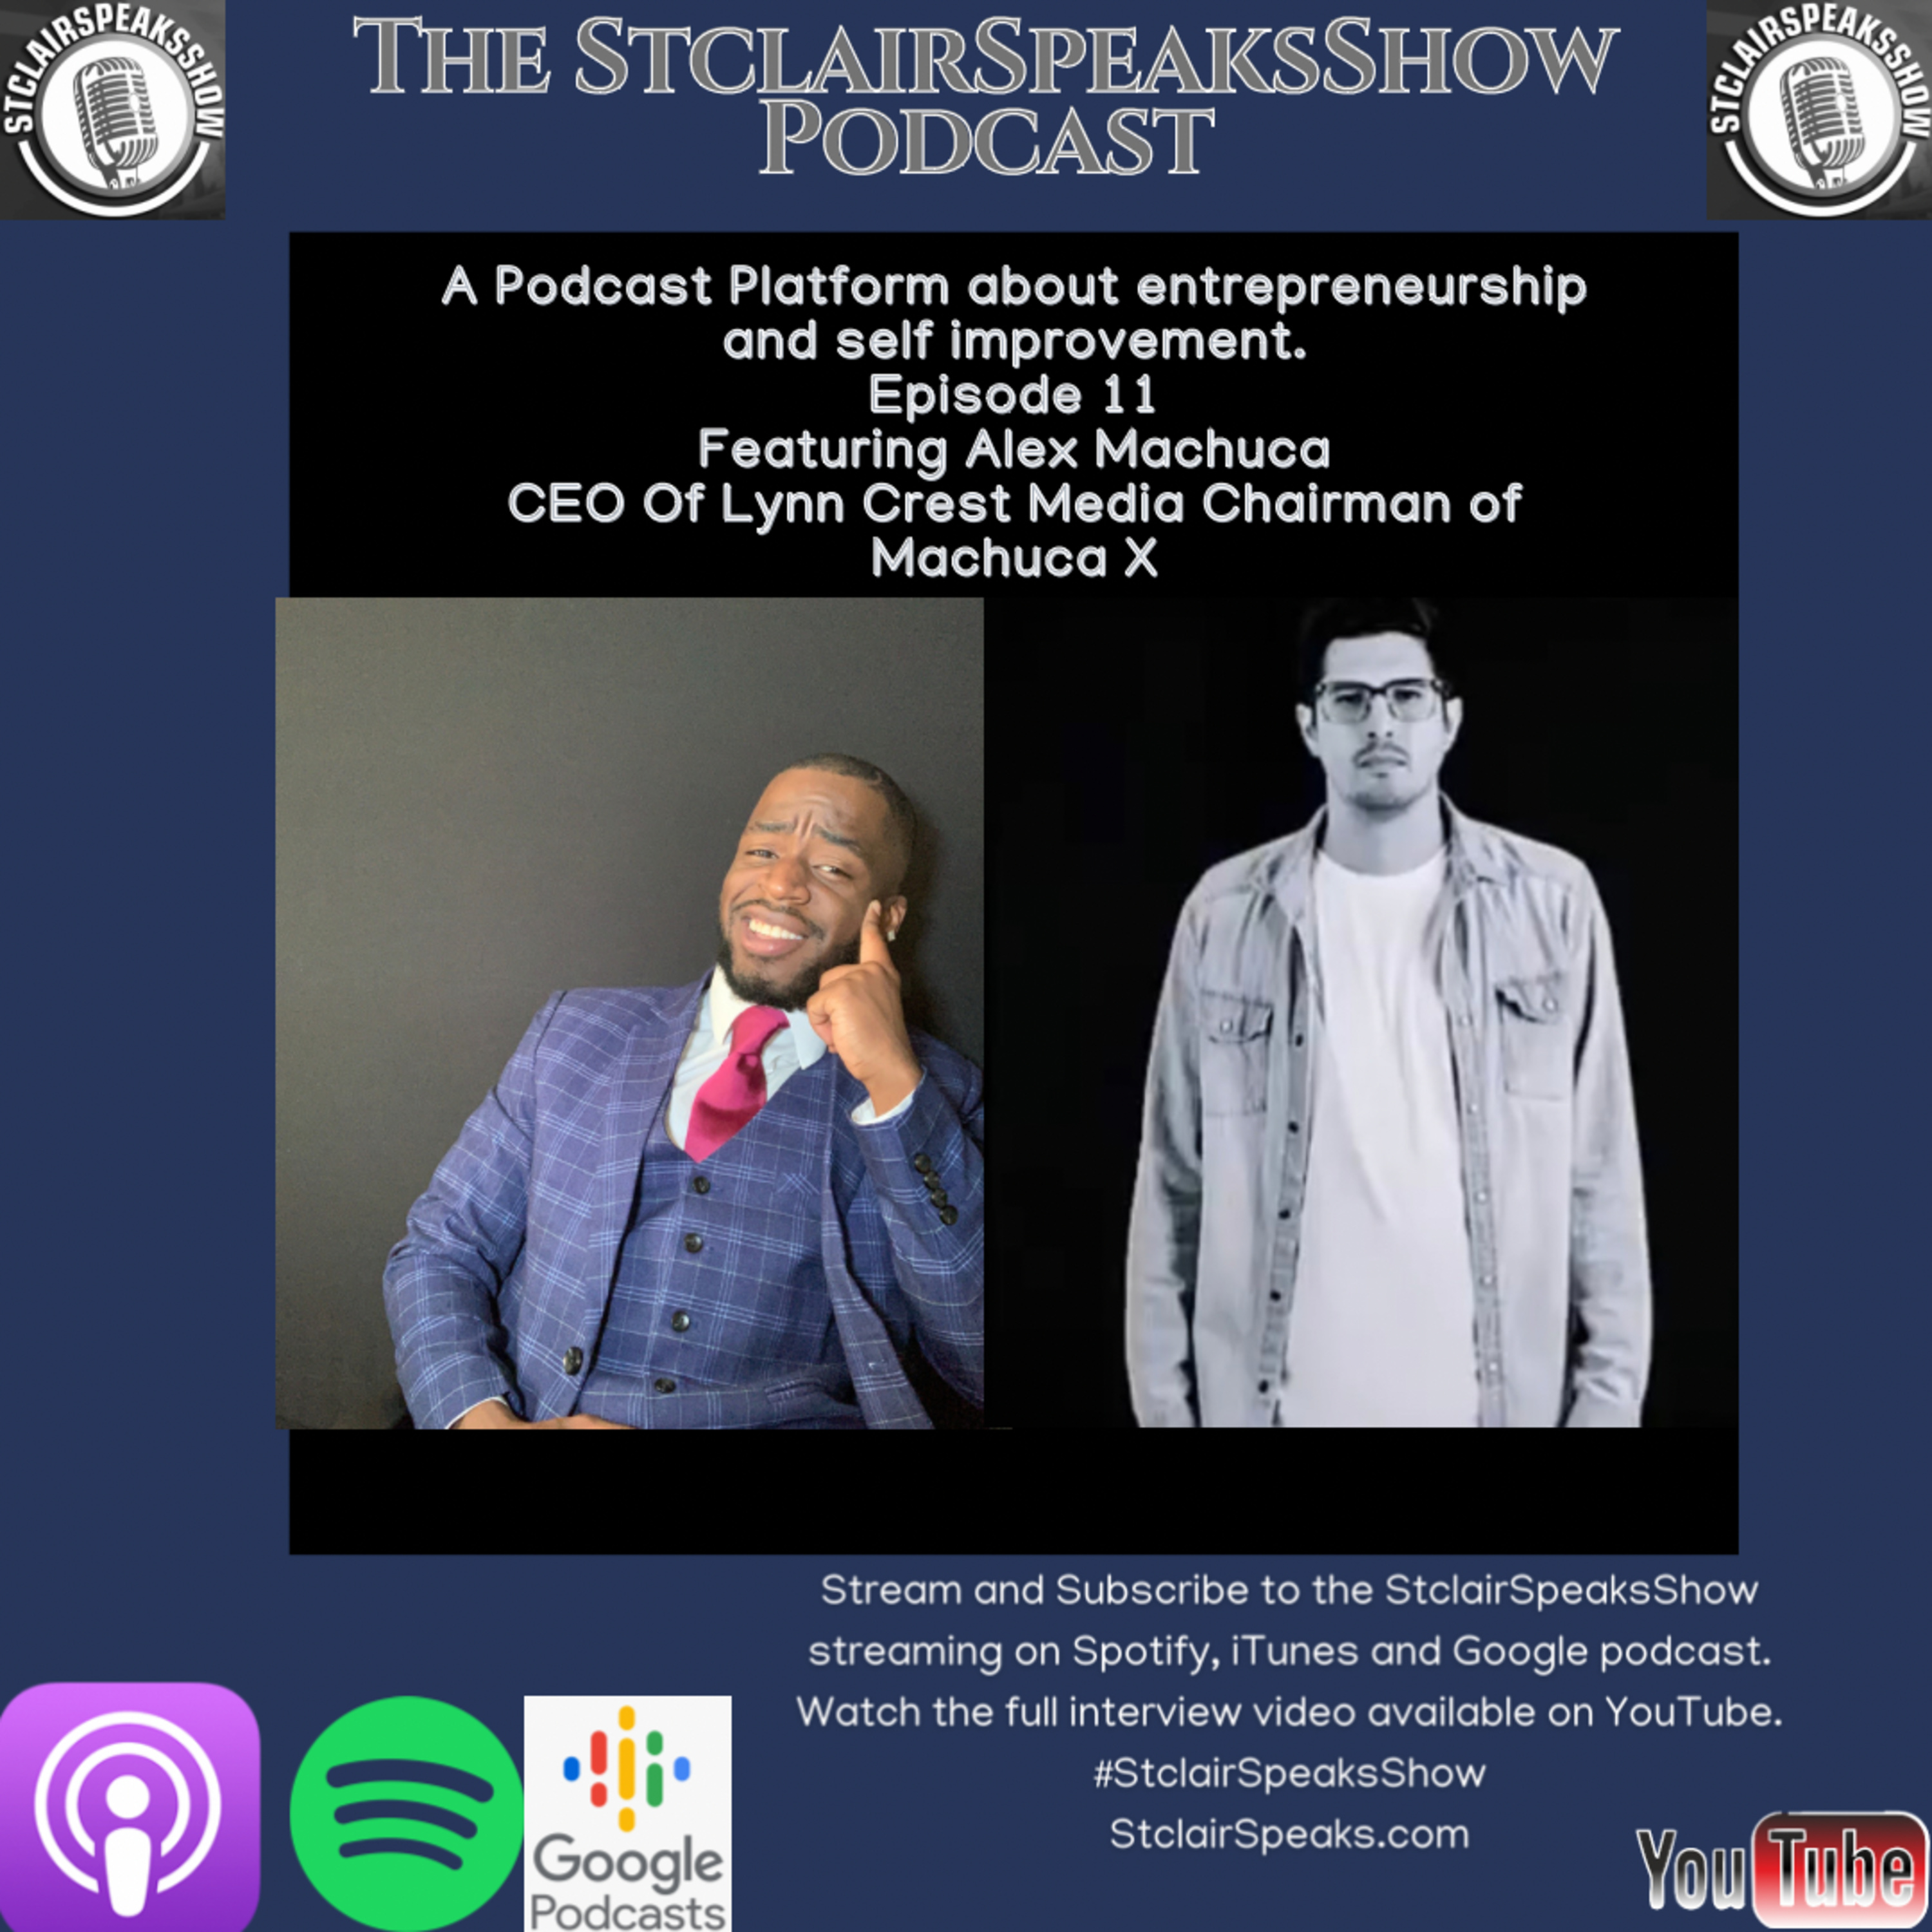 StclairSpeaksShow Podcast Featuring Alex Machuca Ceo of Lyncrest Media & MachucaX